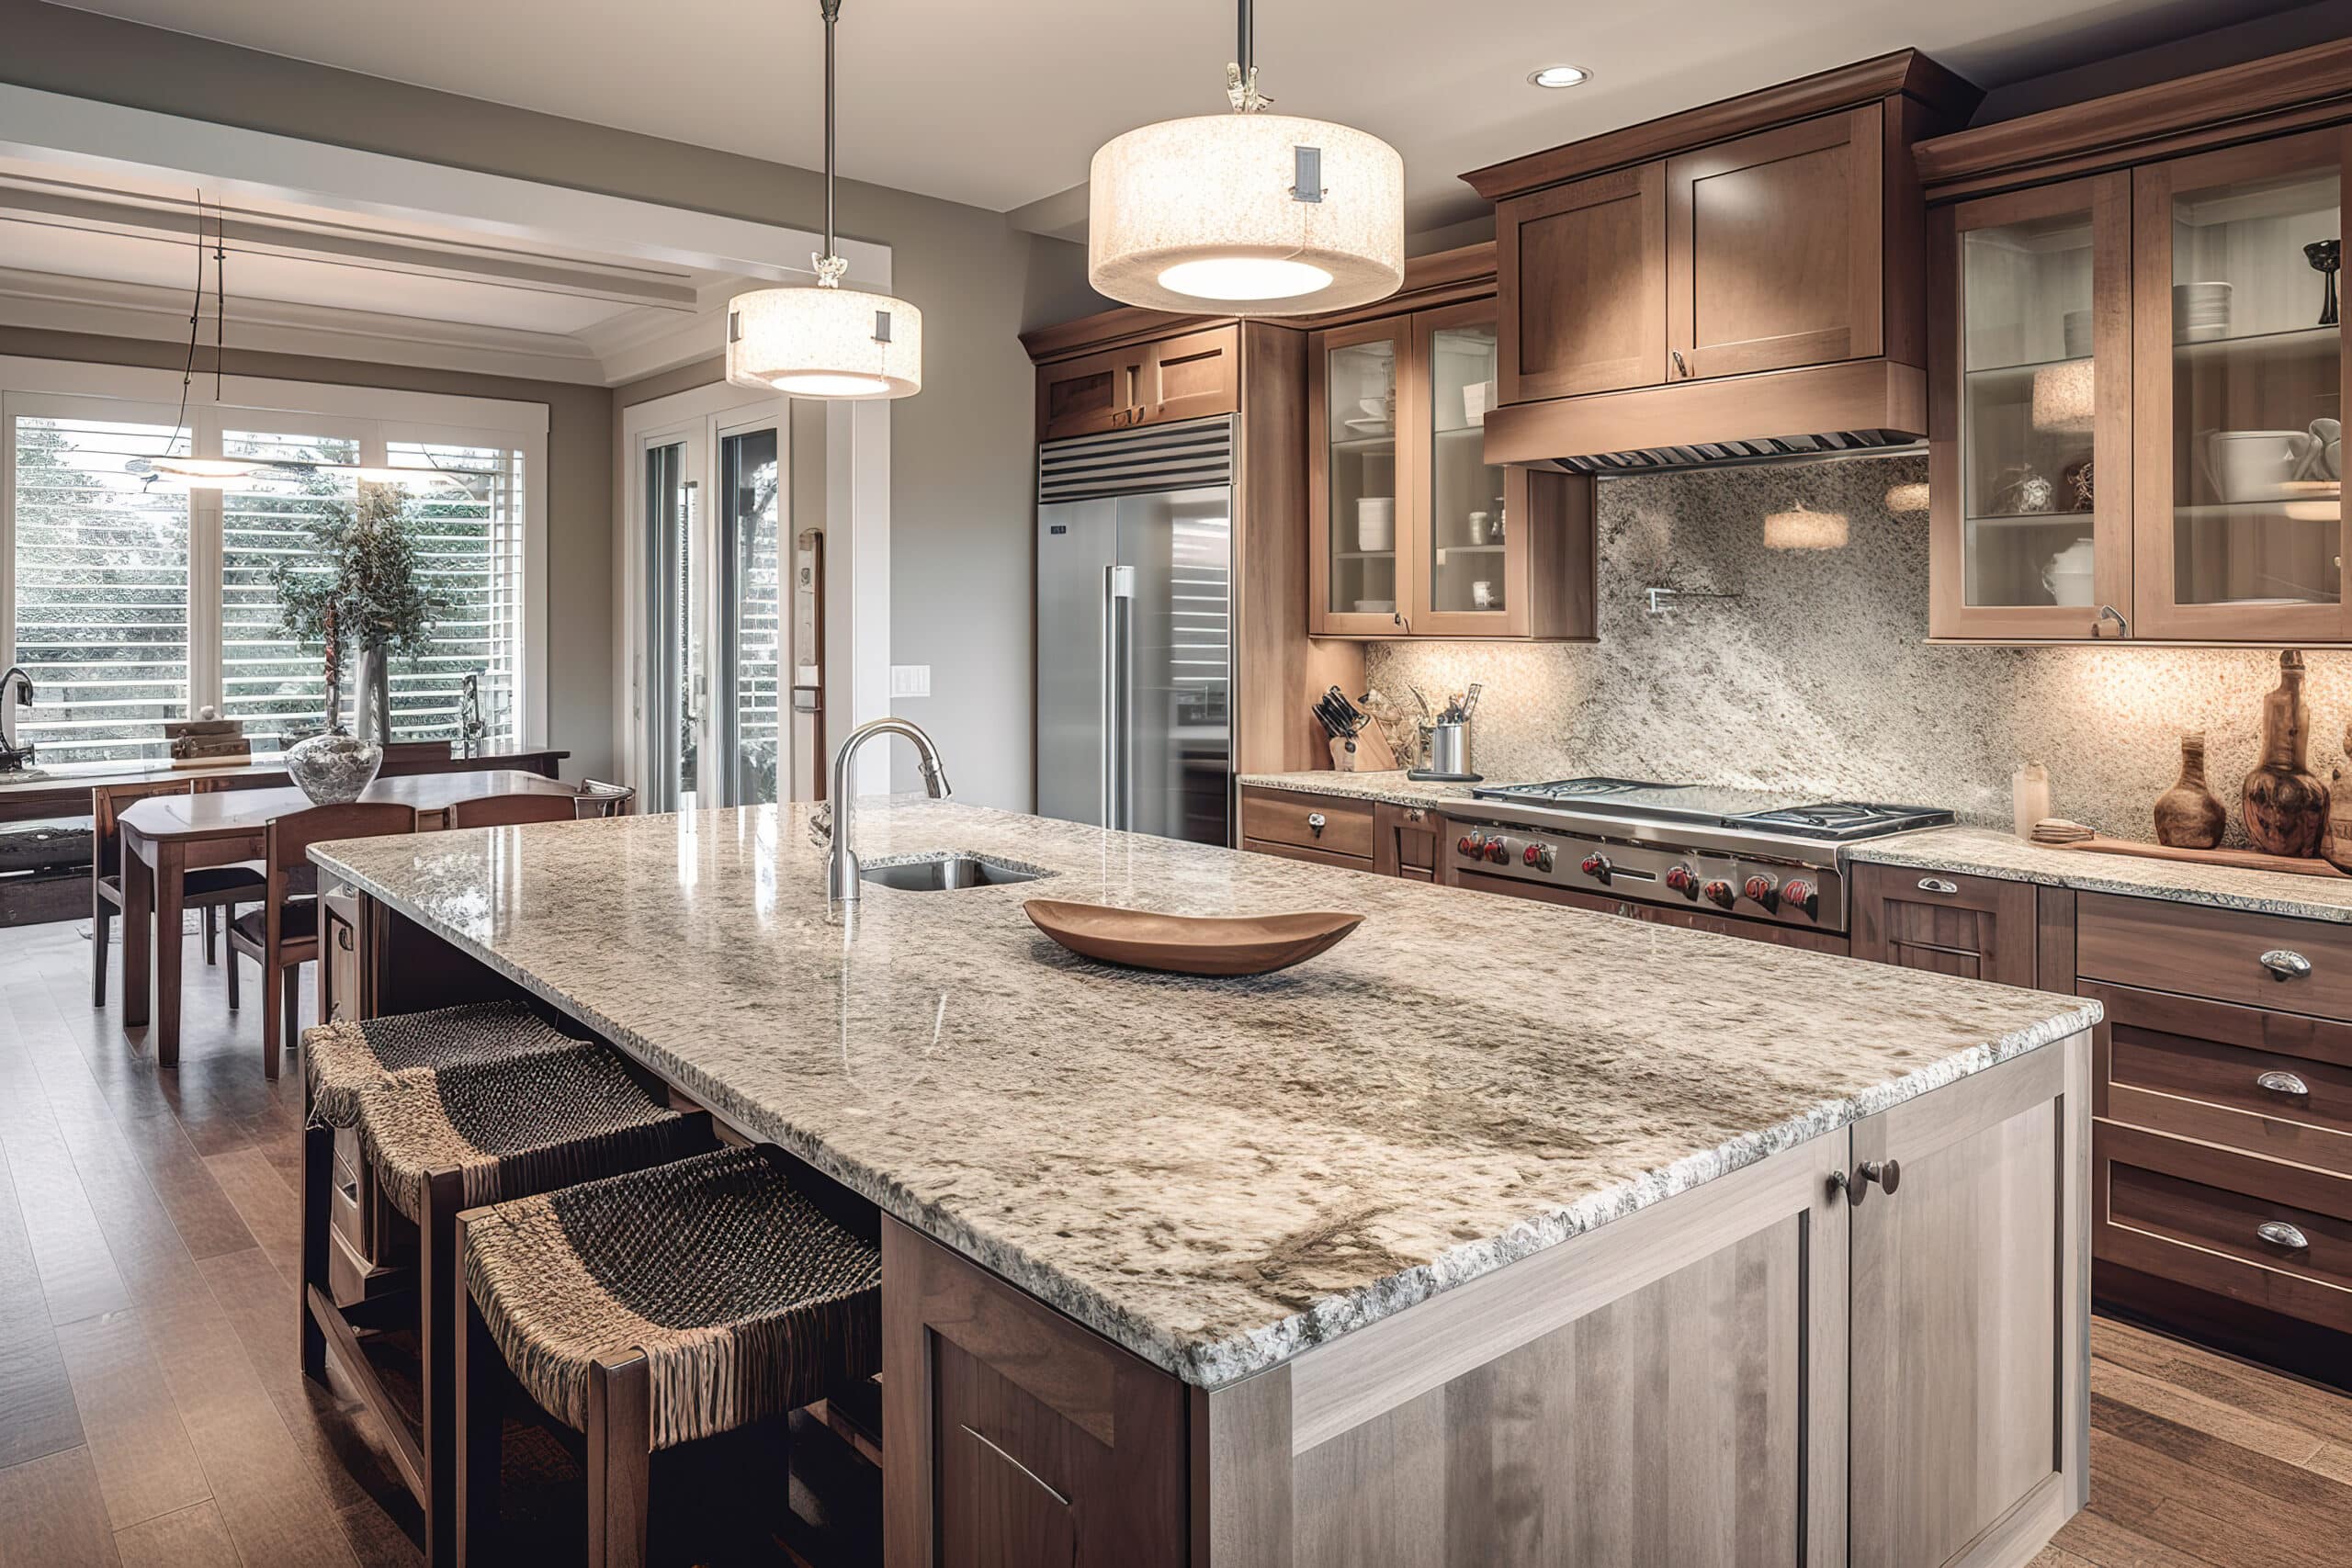 Interior design of a luxury kitchen with an island and granite c